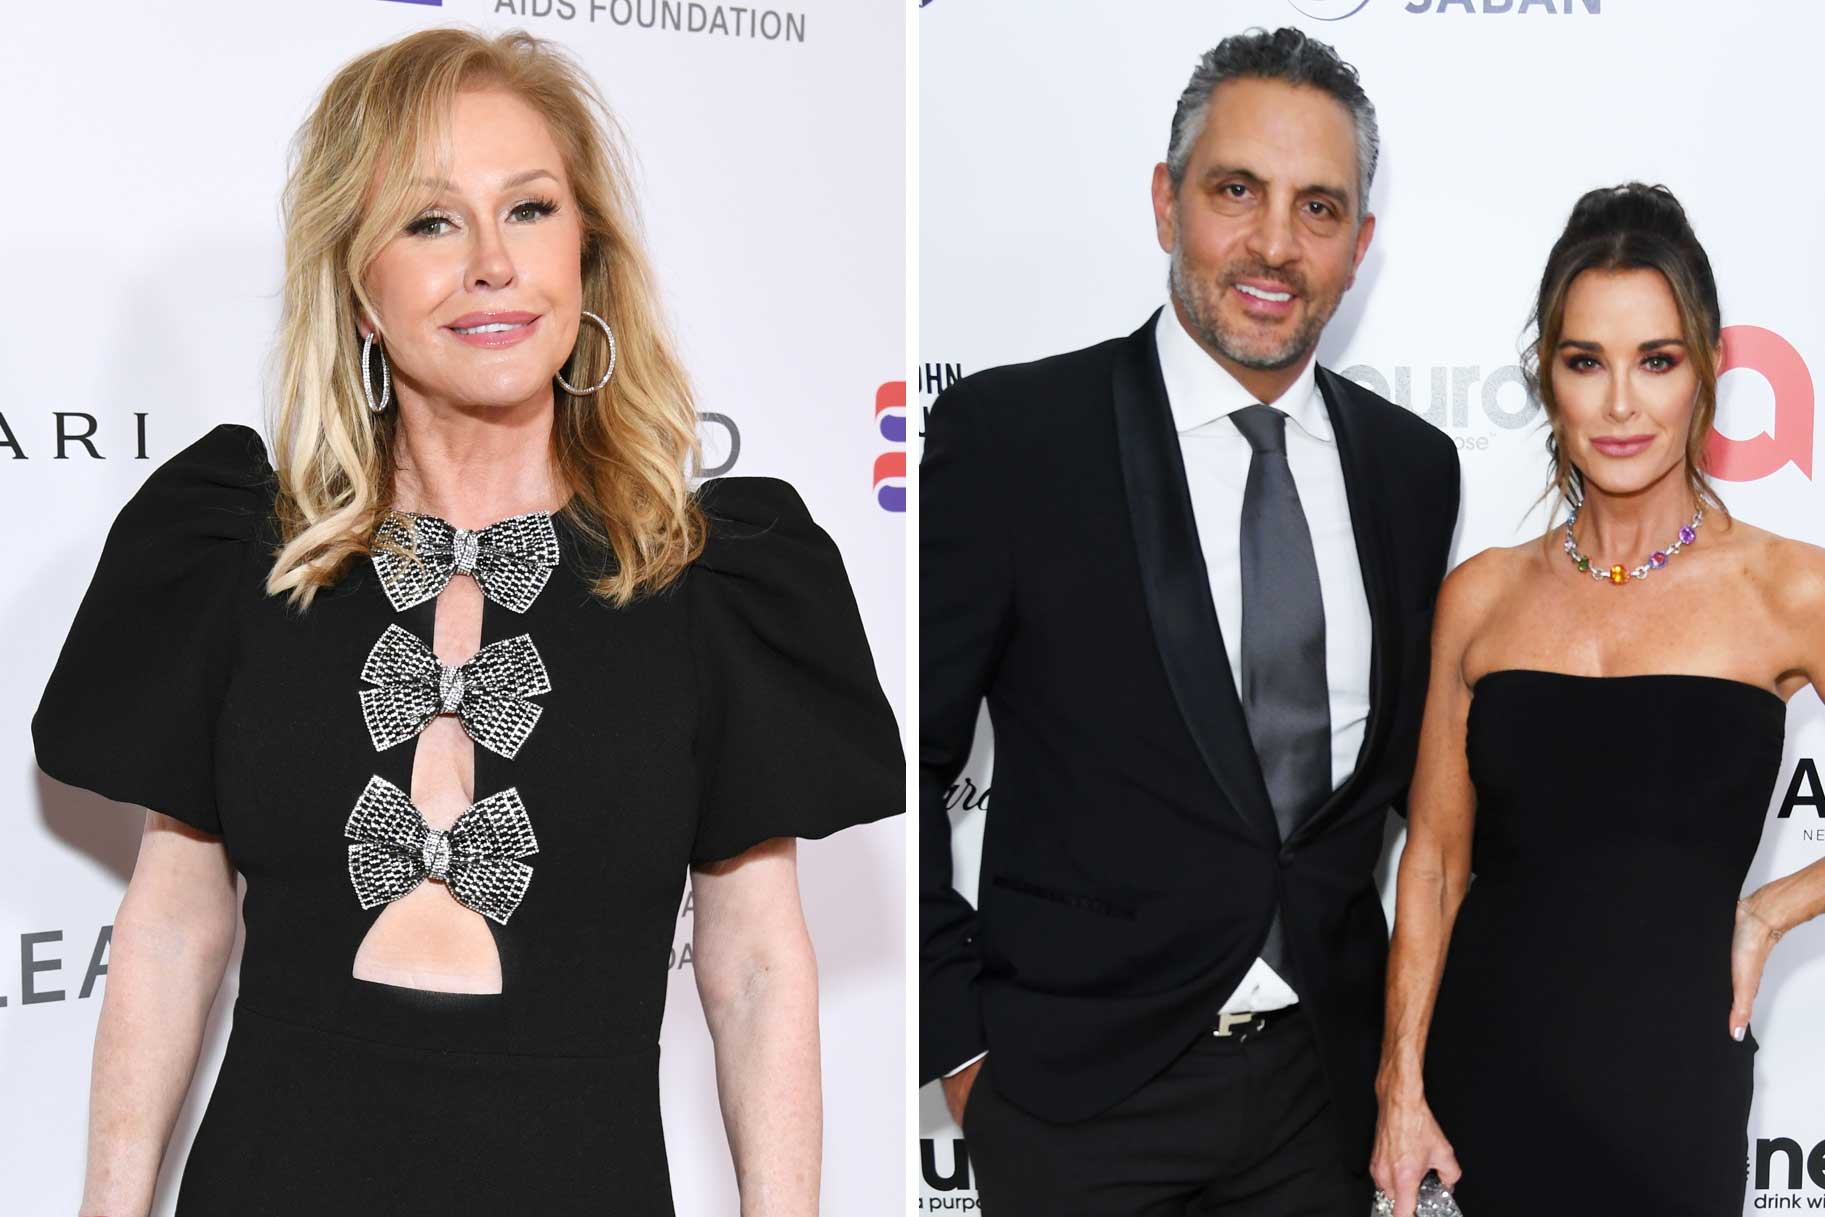 A split of Kathy Hilton wearing a black dress with bows down the middle and Mauricio Umansky and Kyle Richards posing on the red carpet.